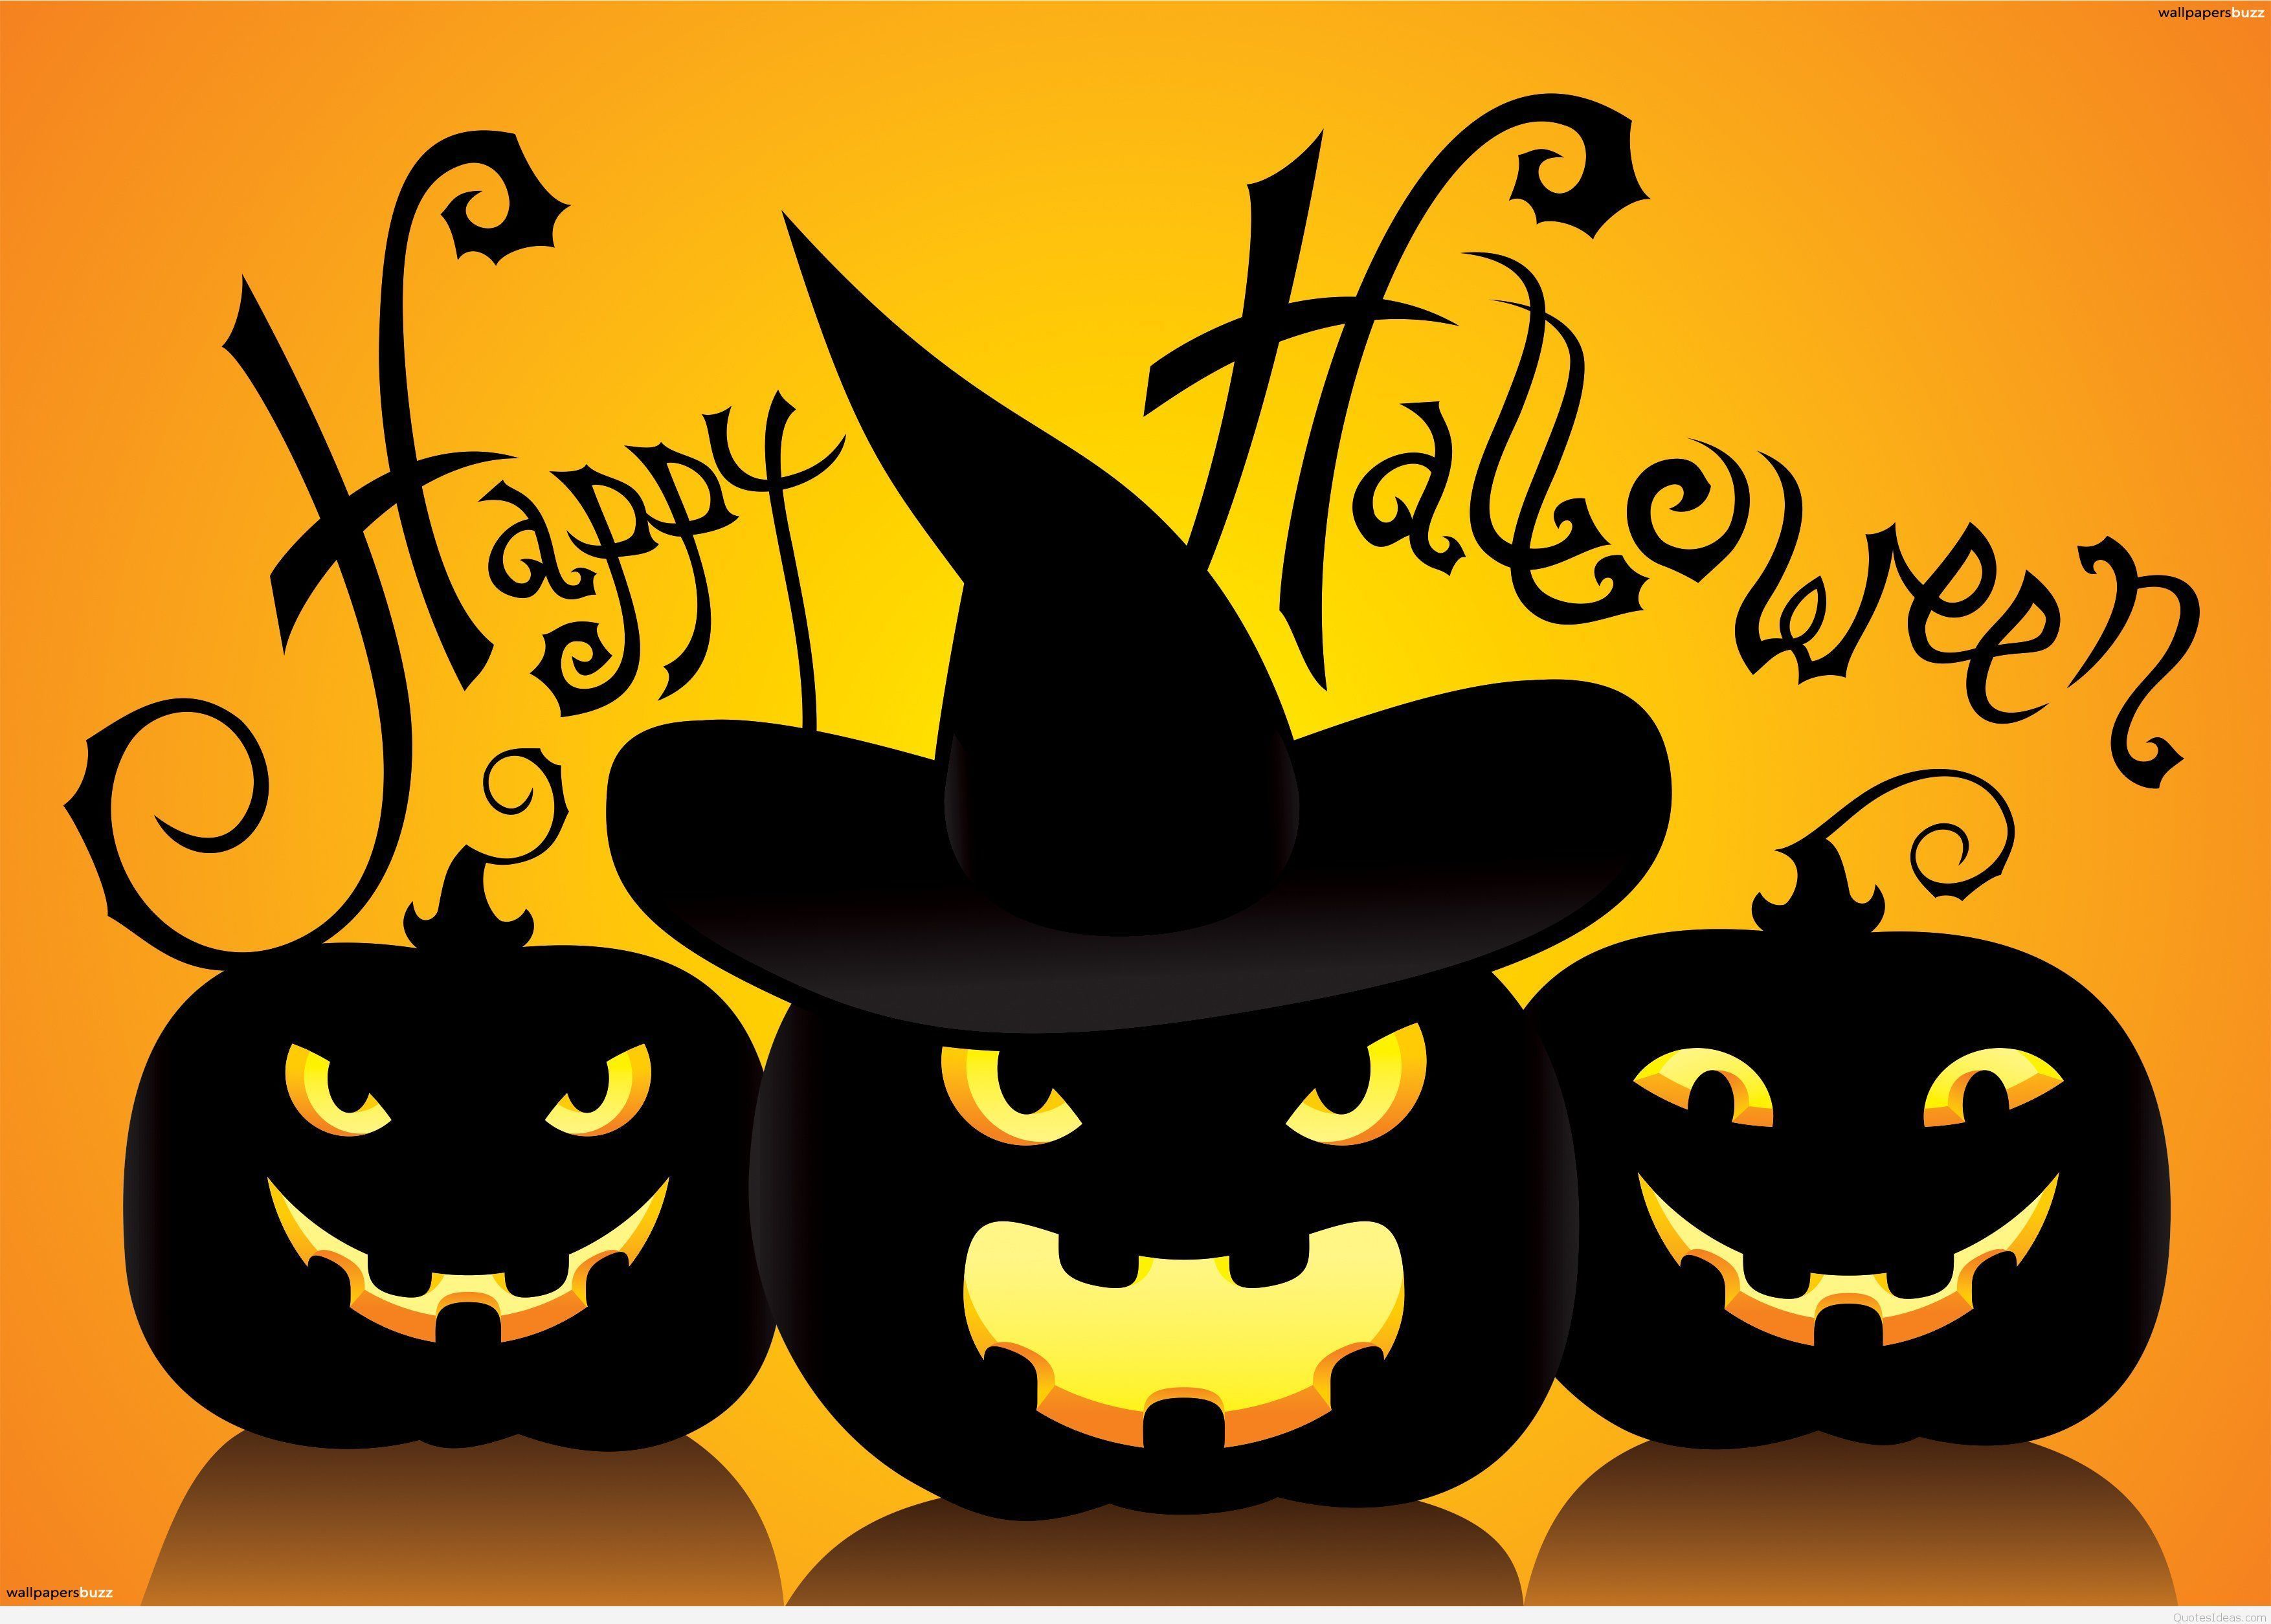 Happy Halloween Quotes. Happy Halloween Quotes & Sayings & Scary Messages & Wishes